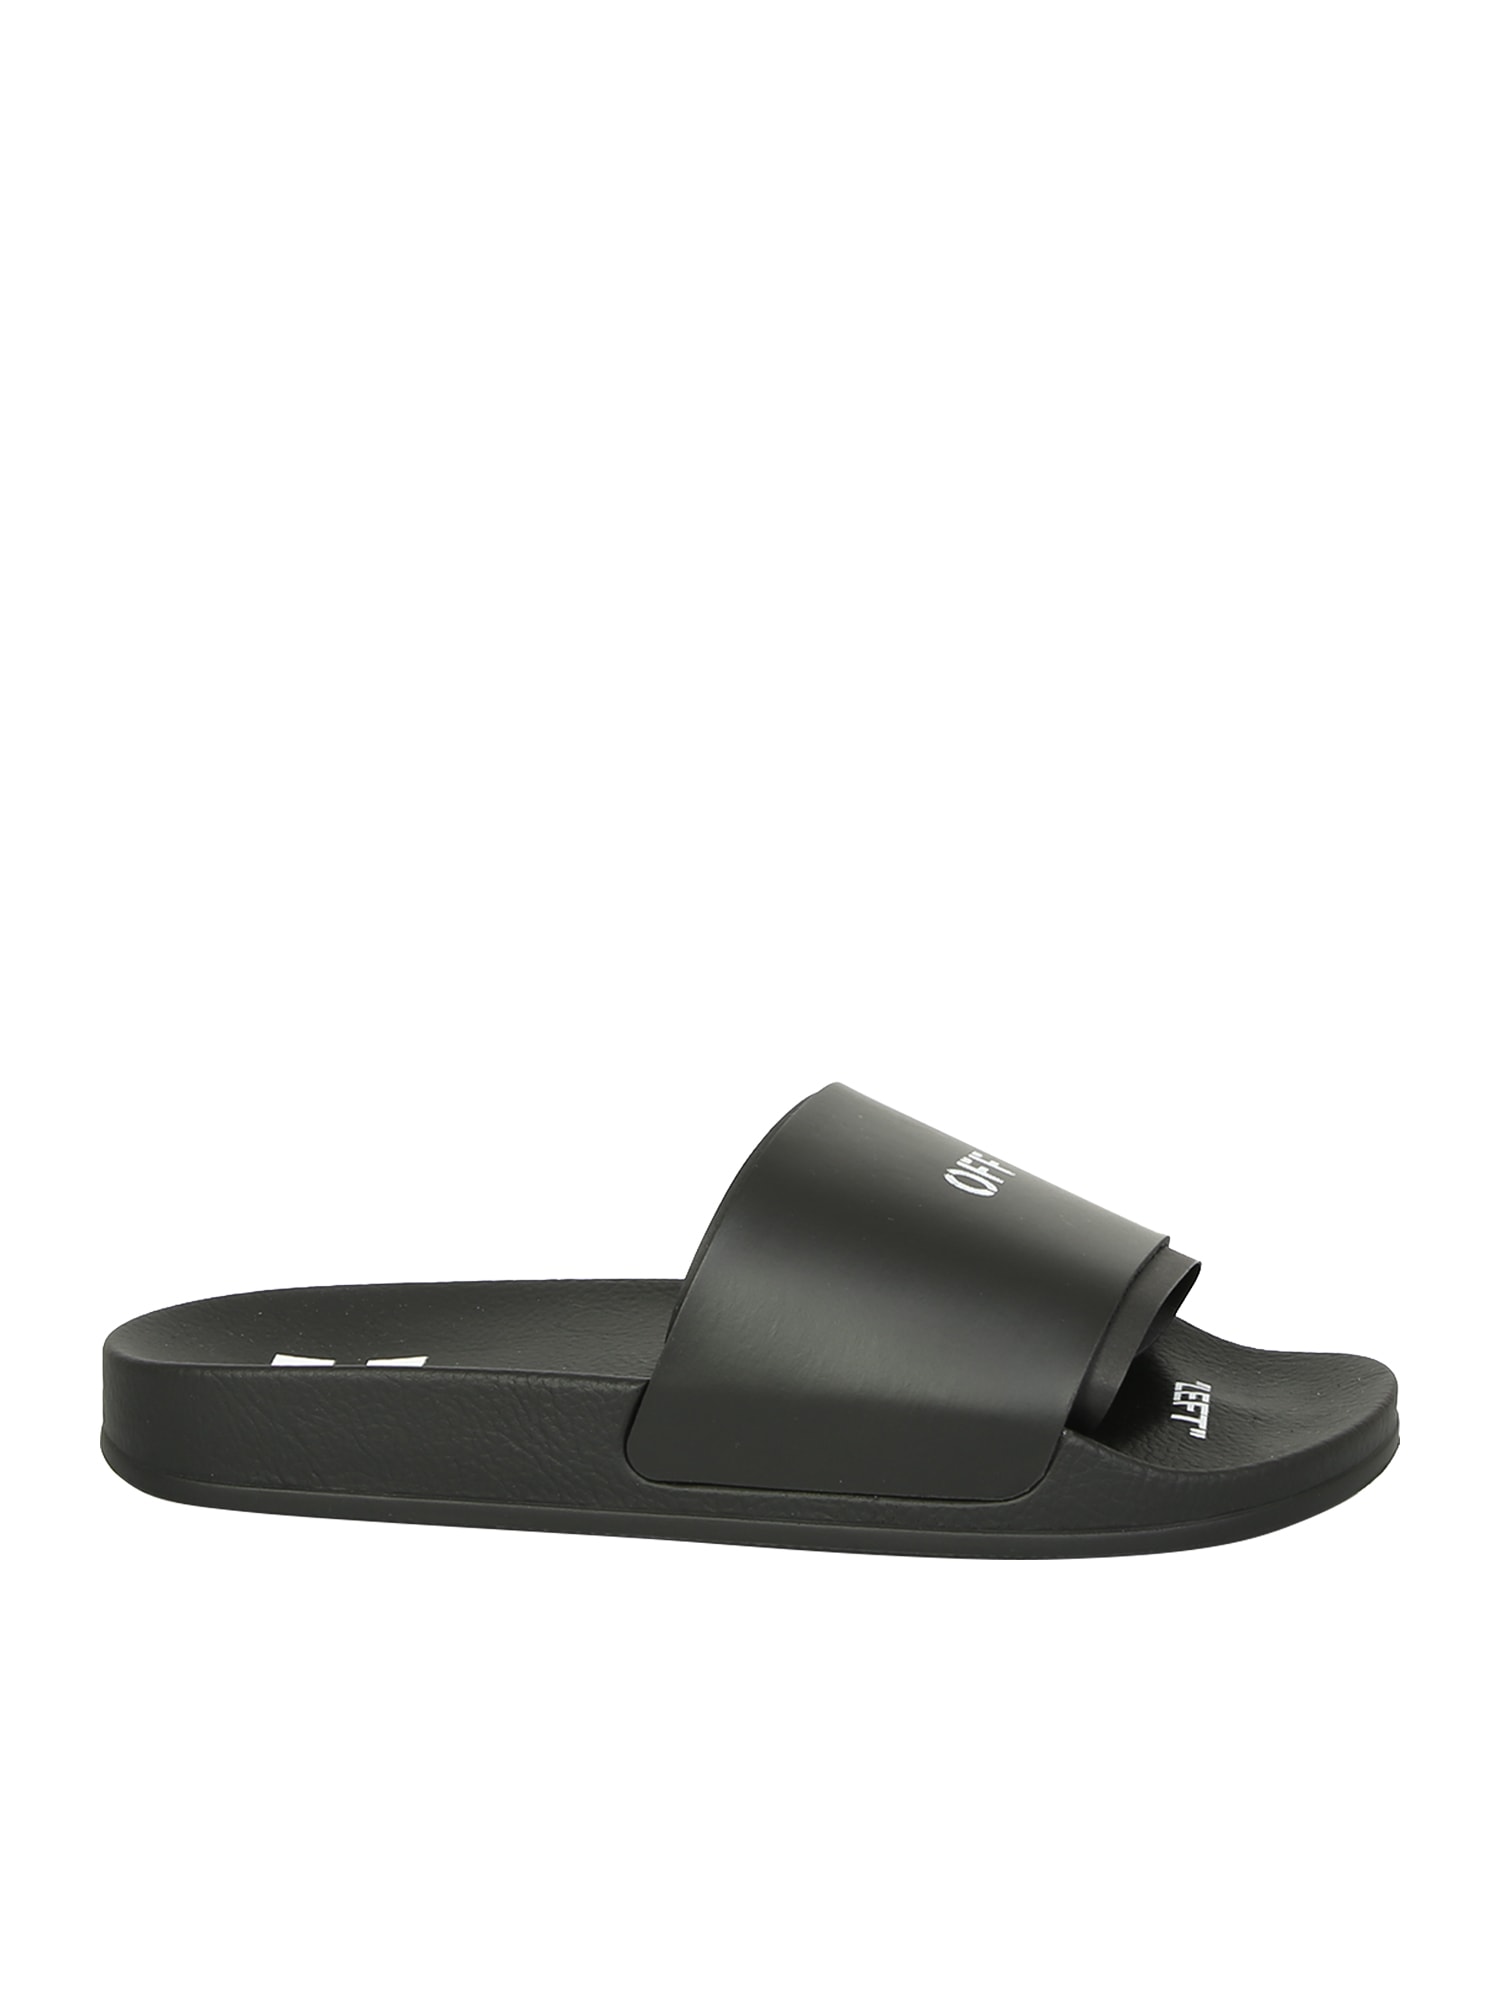 Off-White Slides With Characteristic Arrows Motif Black